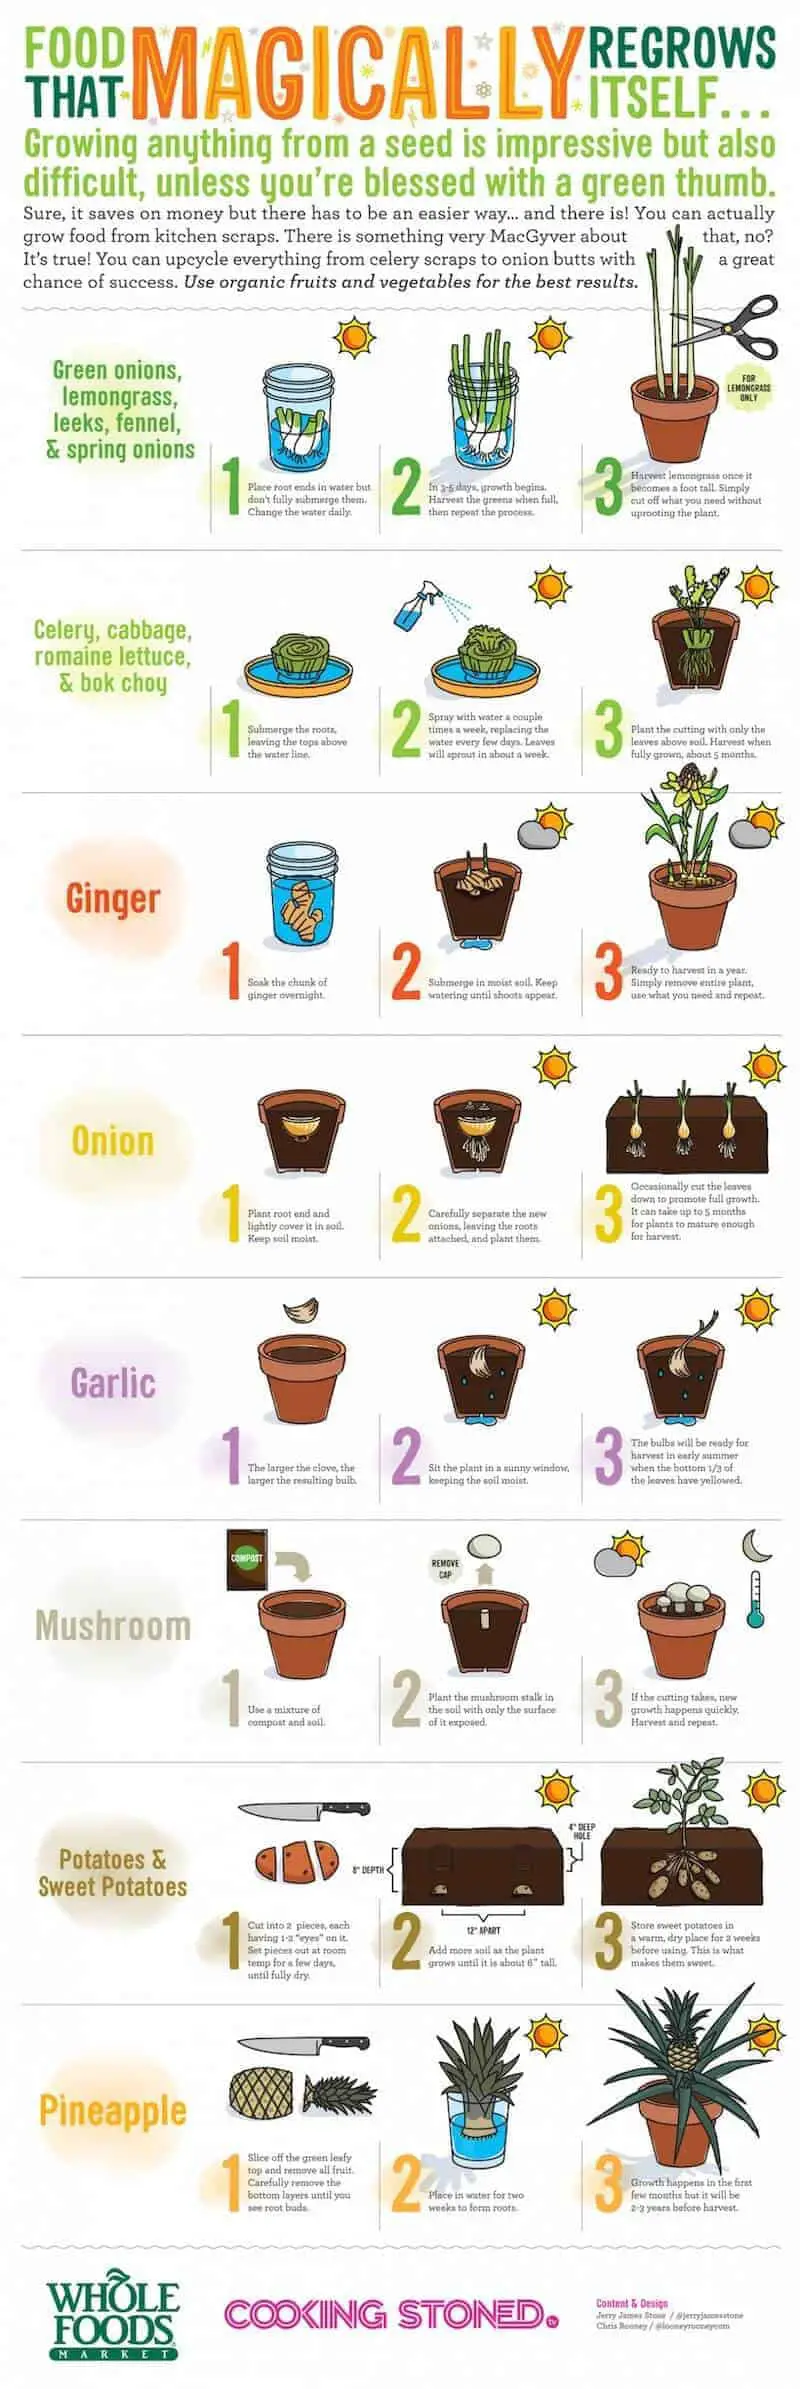 Goods that re-grow from scraps!